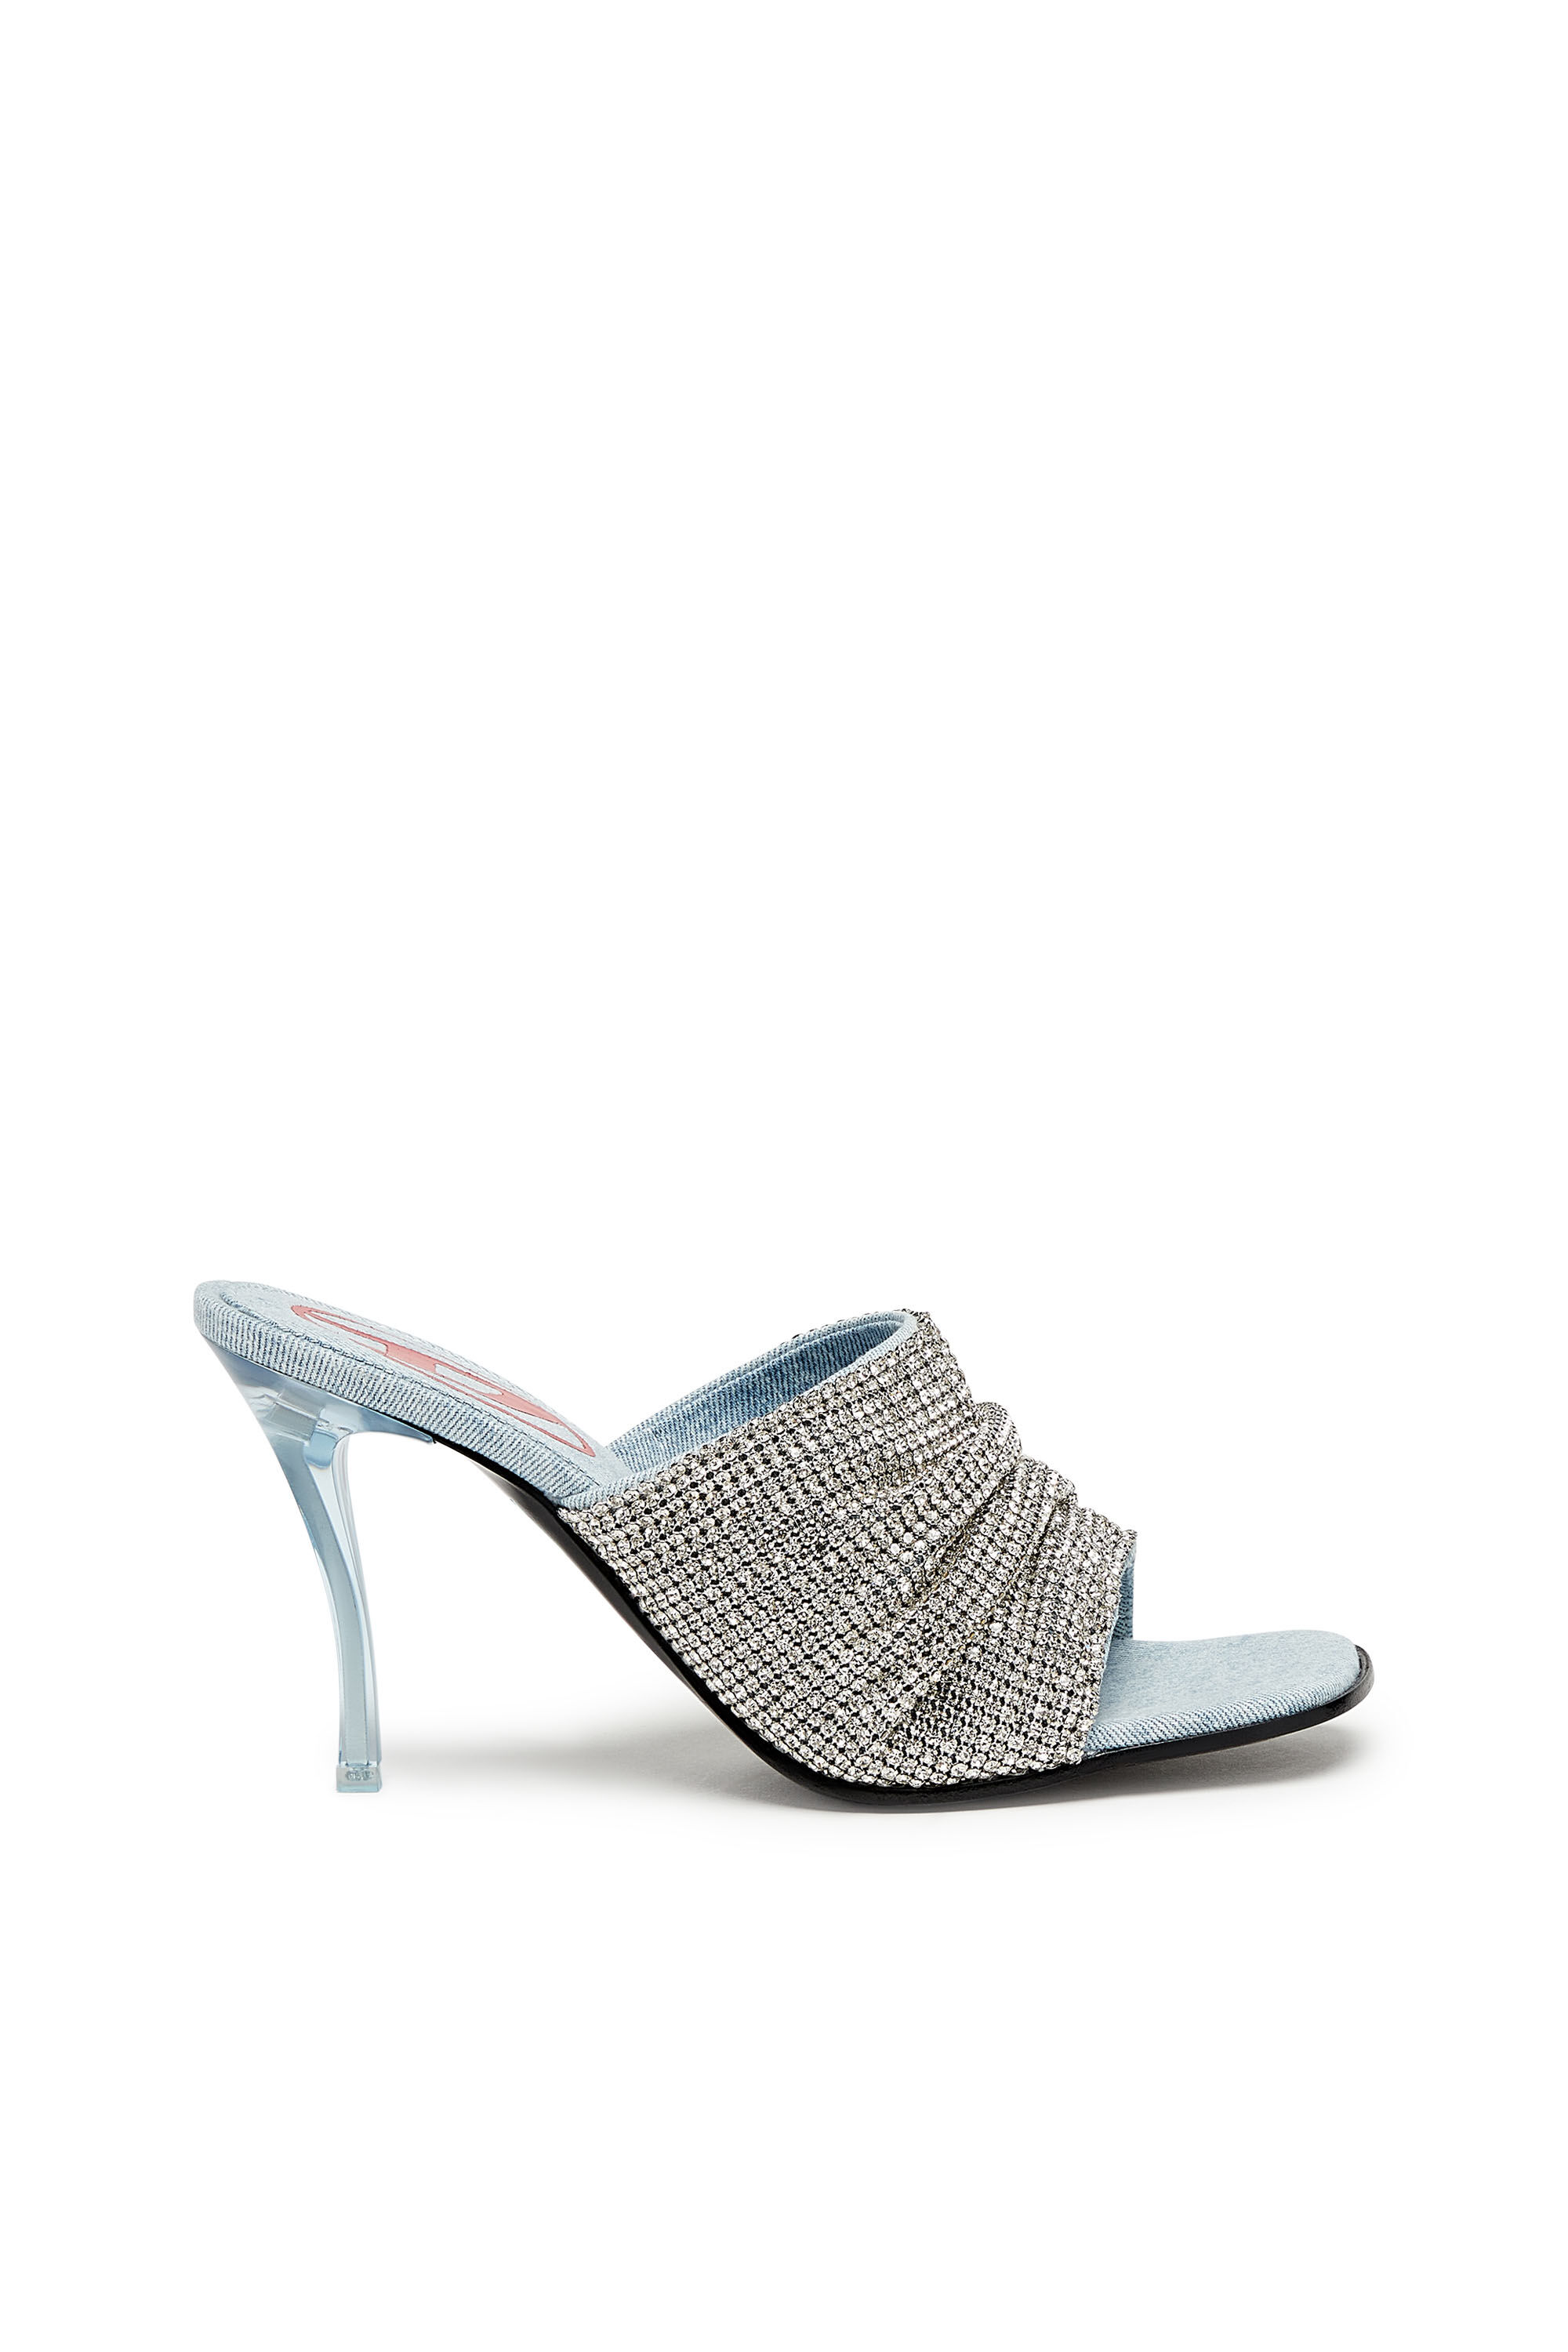 Diesel - D-SYDNEY SDL S, Woman D-Sydney Sdl S Sandals - Mule sandals with rhinestone band in Silver - Image 1